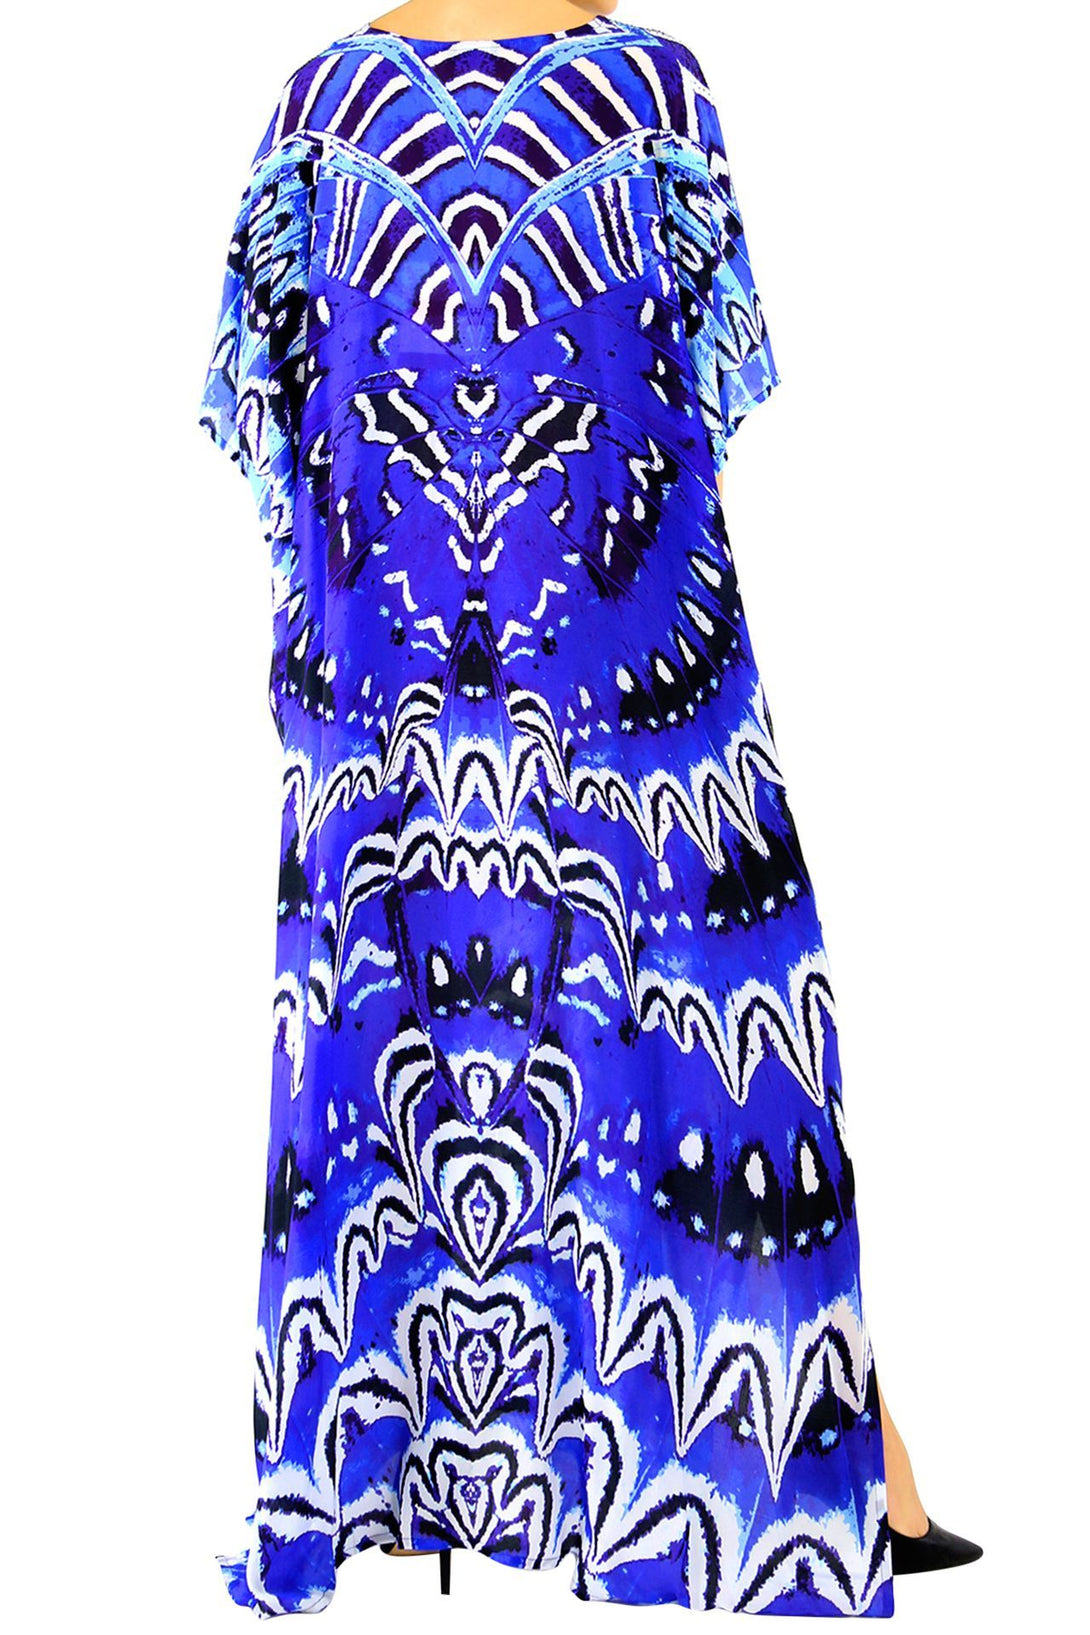     clothes for beach vacation, vacation outfits women, Shahida Parides, kaftan outfit,